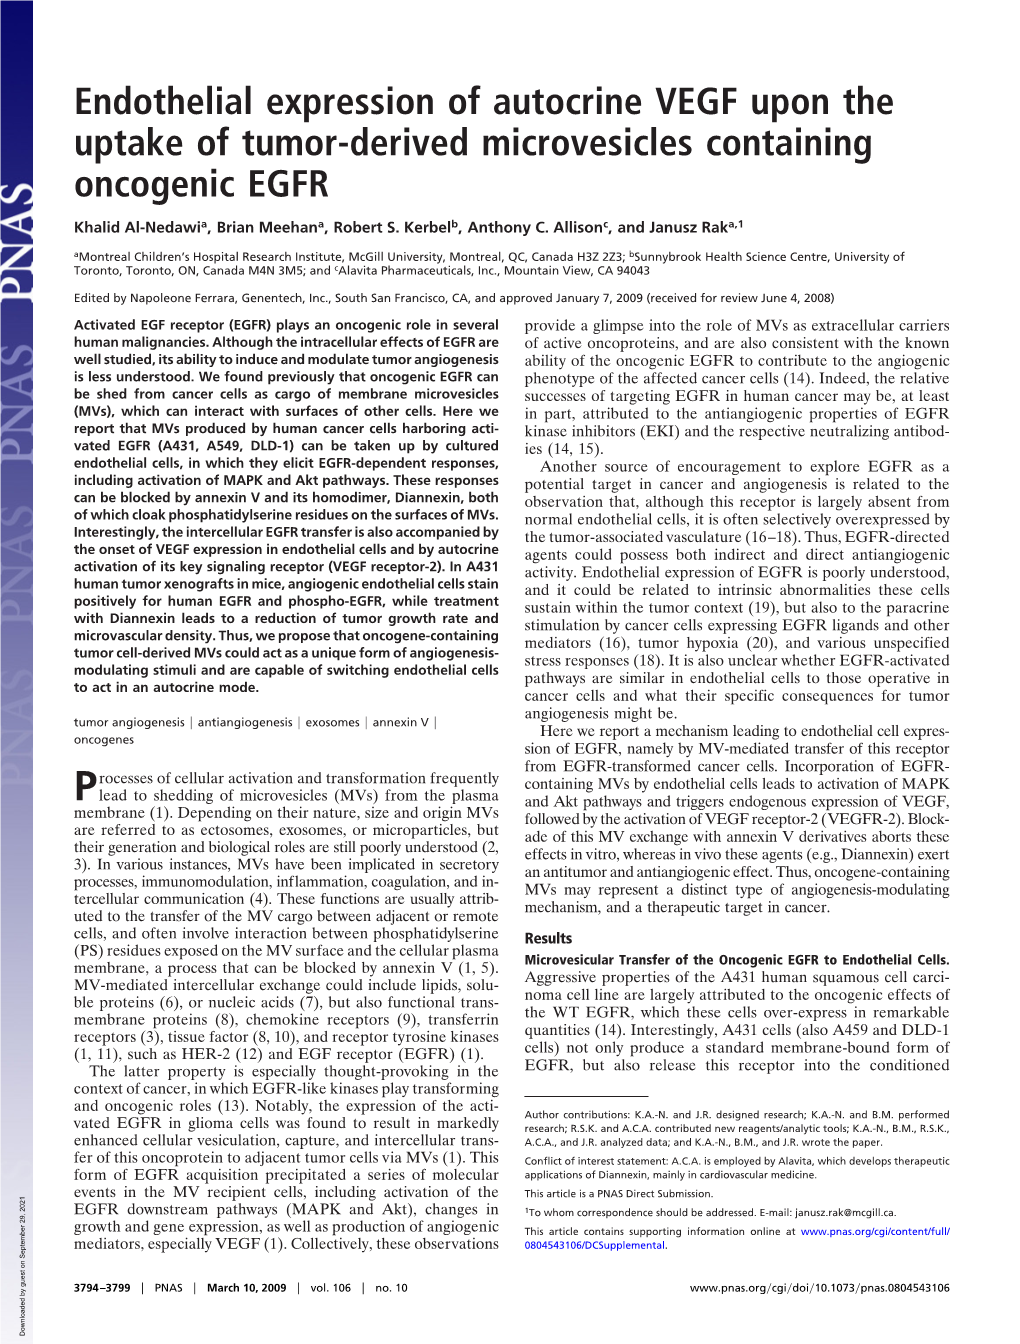 Endothelial Expression of Autocrine VEGF Upon the Uptake of Tumor-Derived Microvesicles Containing Oncogenic EGFR